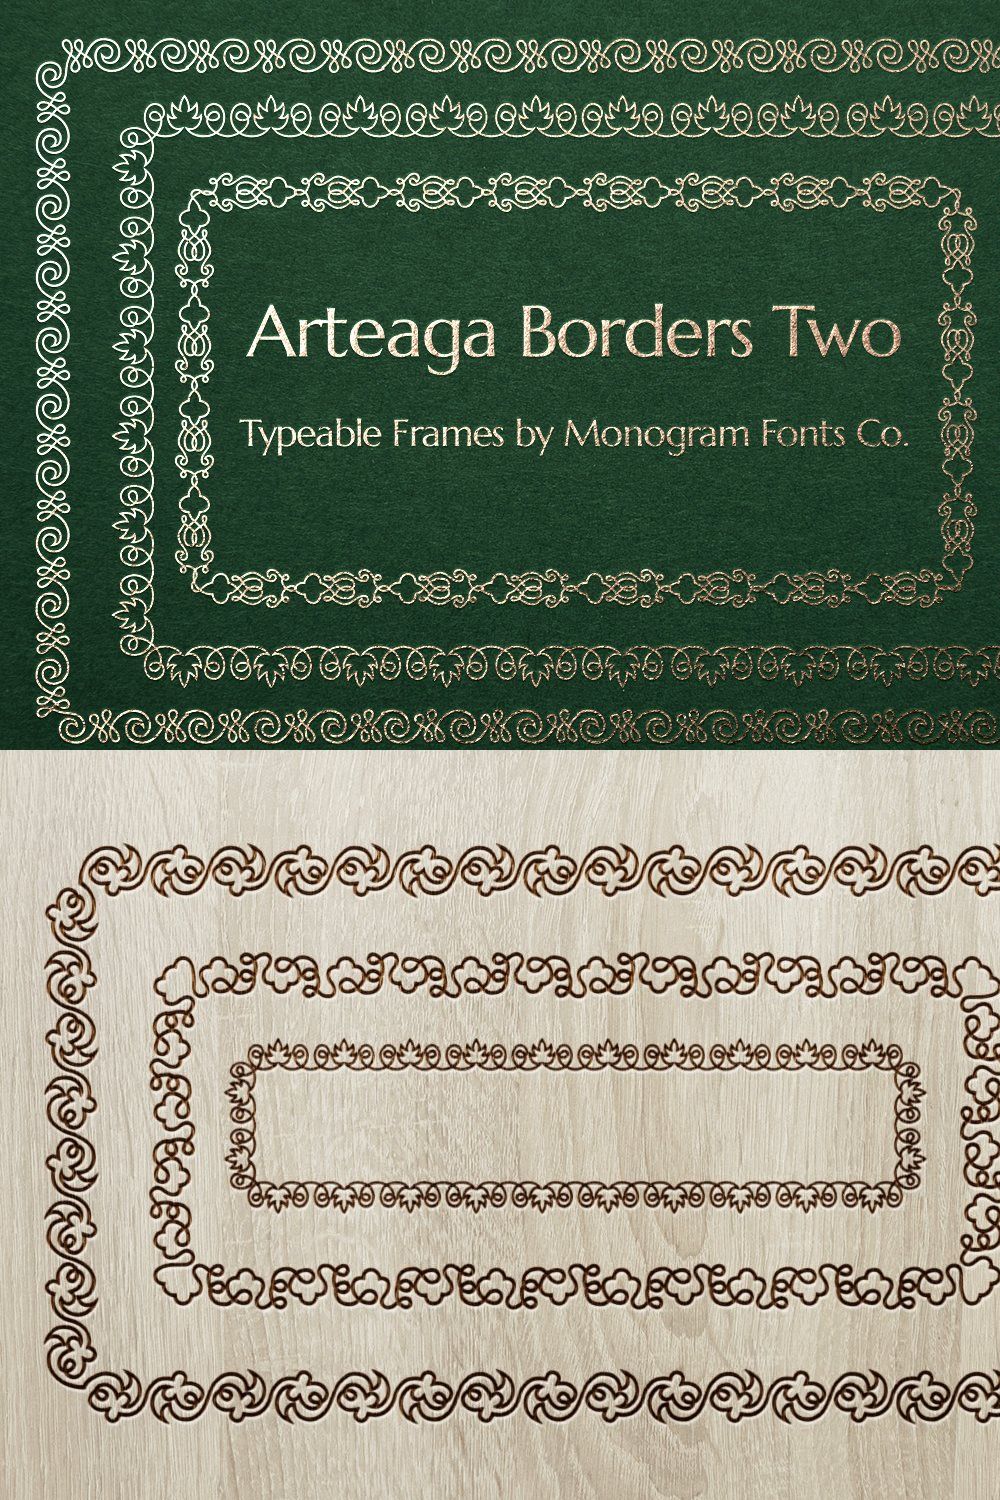 MFC Arteaga Borders Two pinterest preview image.